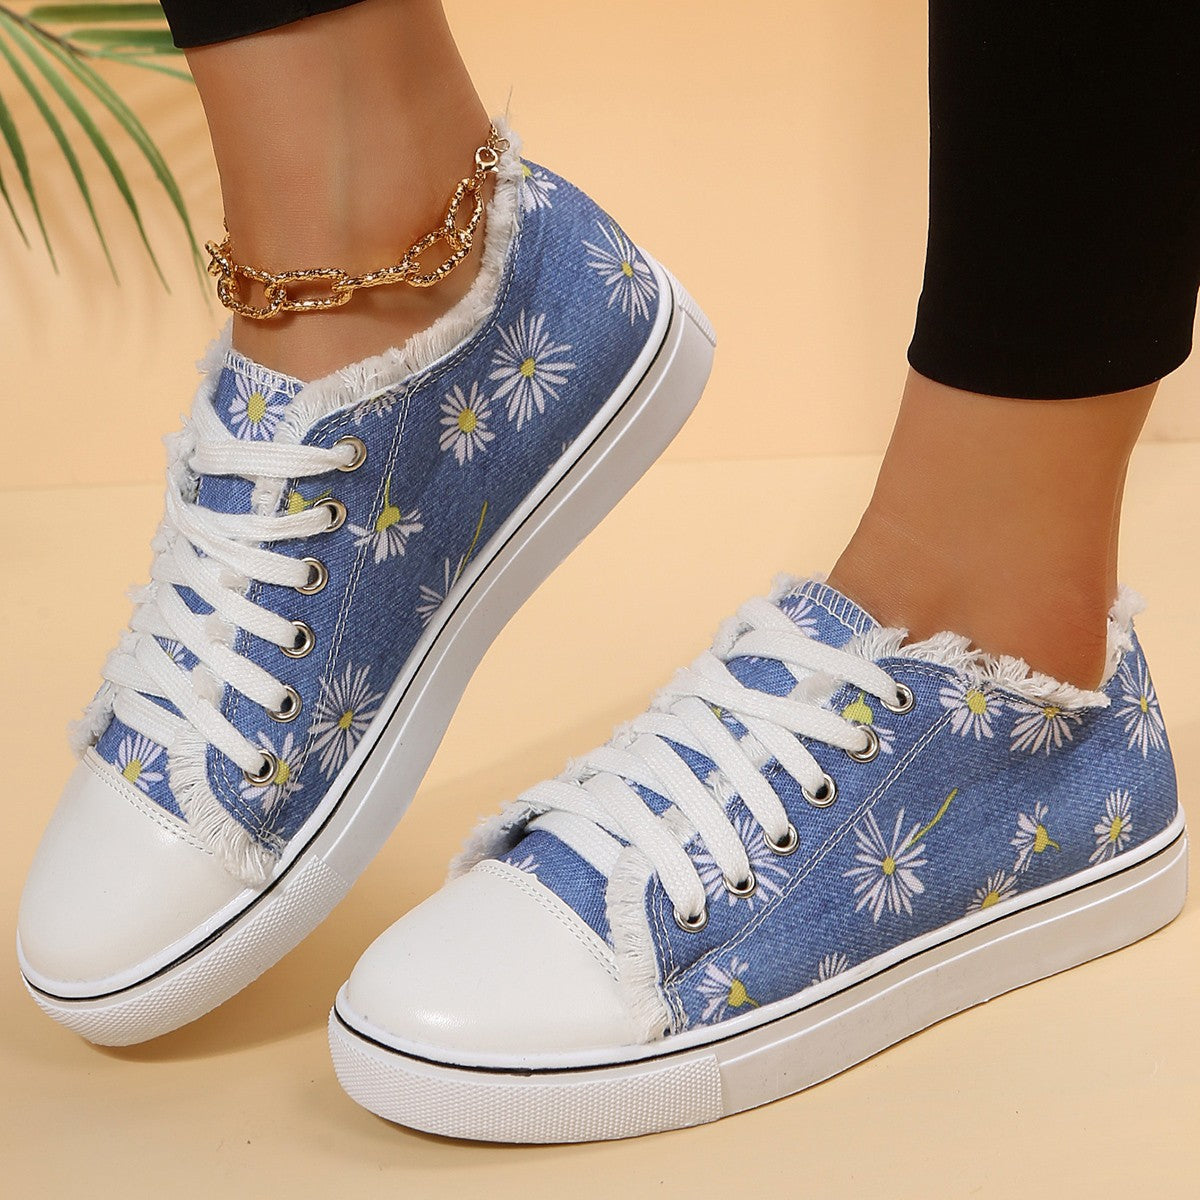 Trainers & Sneakers  | Casual Flat Canvas Shoes Flowers Lace-up Flowers Print Loafers Women Walking Shoes | Denim Flower |  36.| thecurvestory.myshopify.com